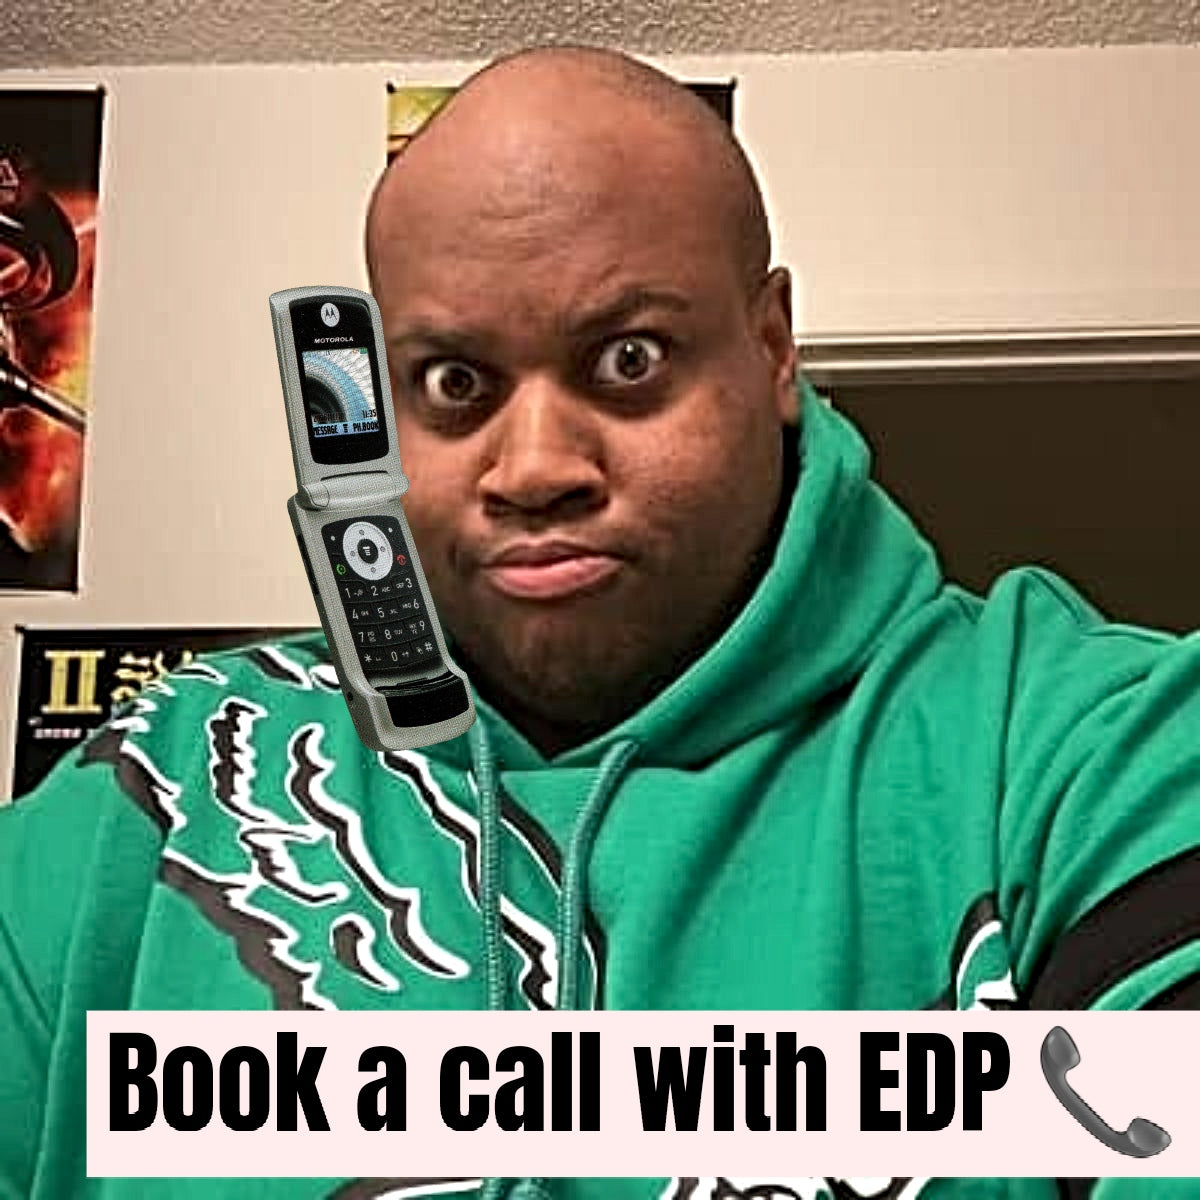 What Can We Learn From the EDP445 Situation?, by Clarus